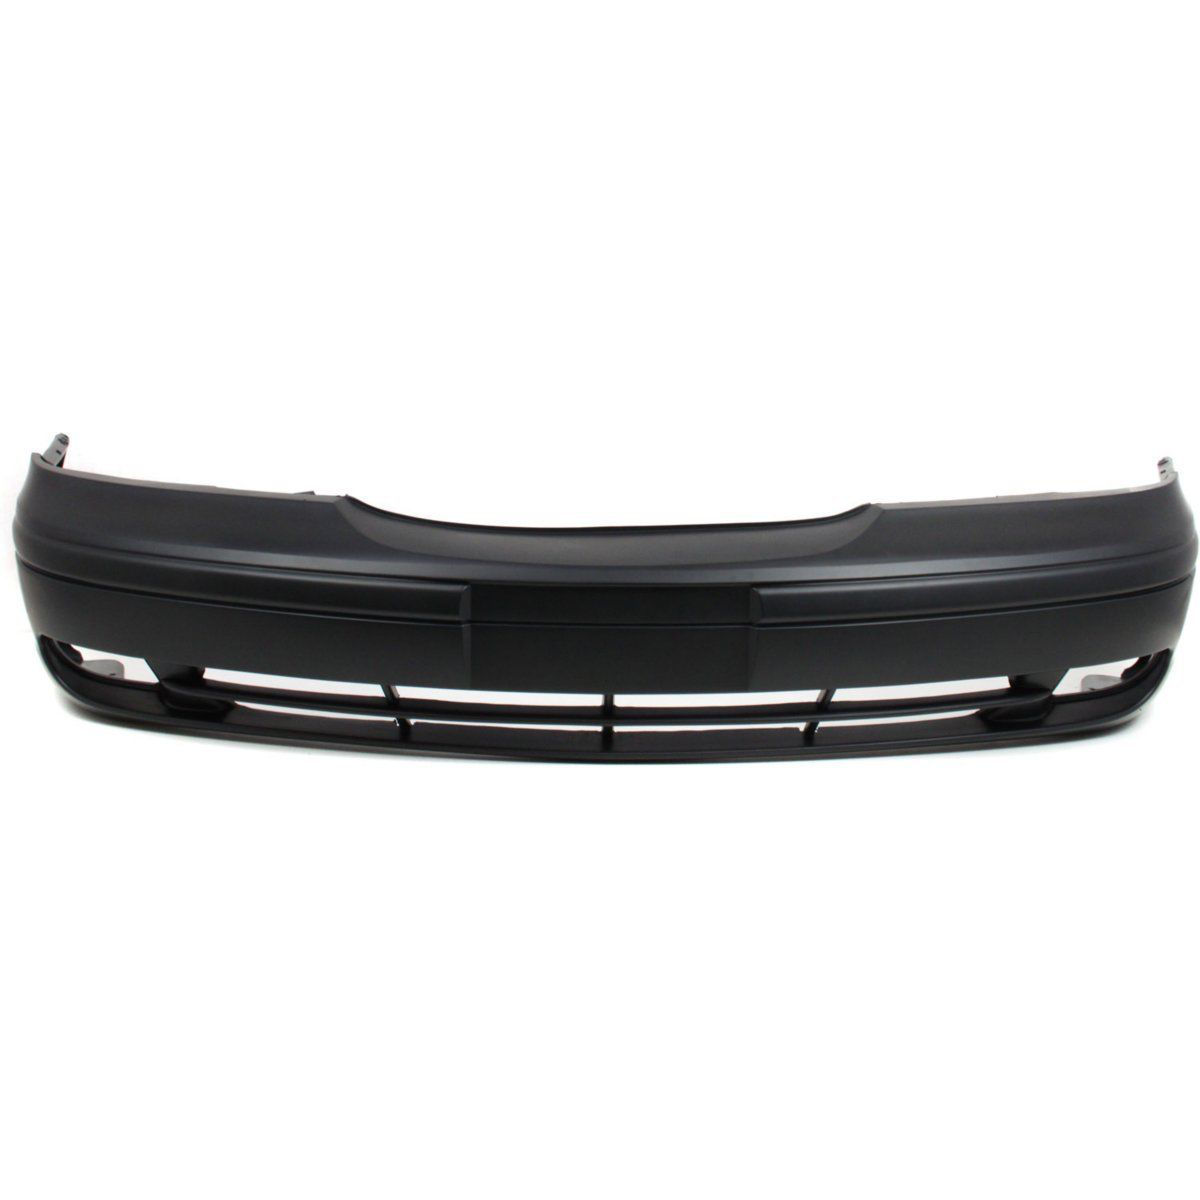 2000-2003 MERCURY SABLE Front Bumper Cover black - paint to Match Painted to Match